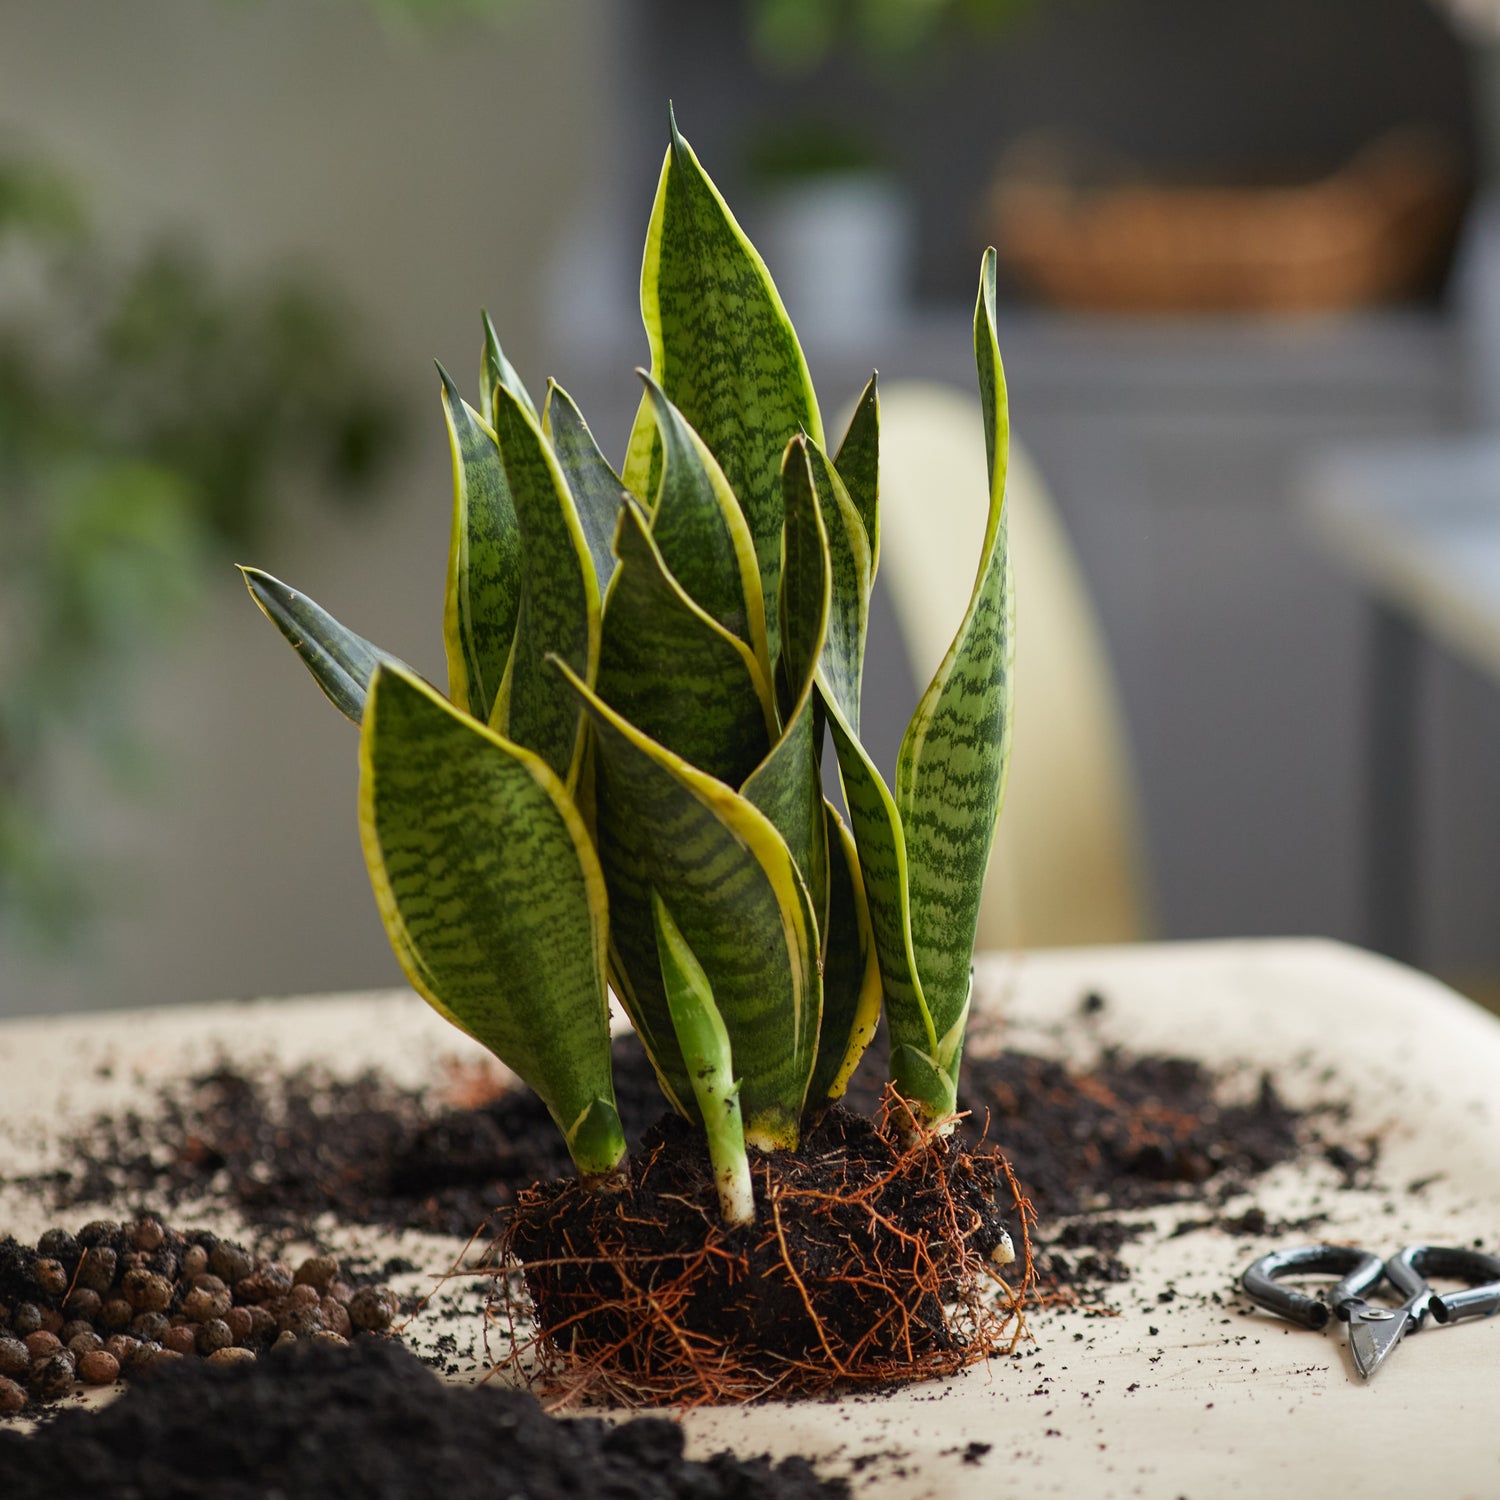 Photo of a Dracaena trifasciata 'Laurentii' snake plant, displaying vivid yellow stripes, with exposed roots ready to be repotted. The roots, tinged with red, are visible on a table alongside small black scissors. Hydroballs are positioned to the left, while the blurred background.